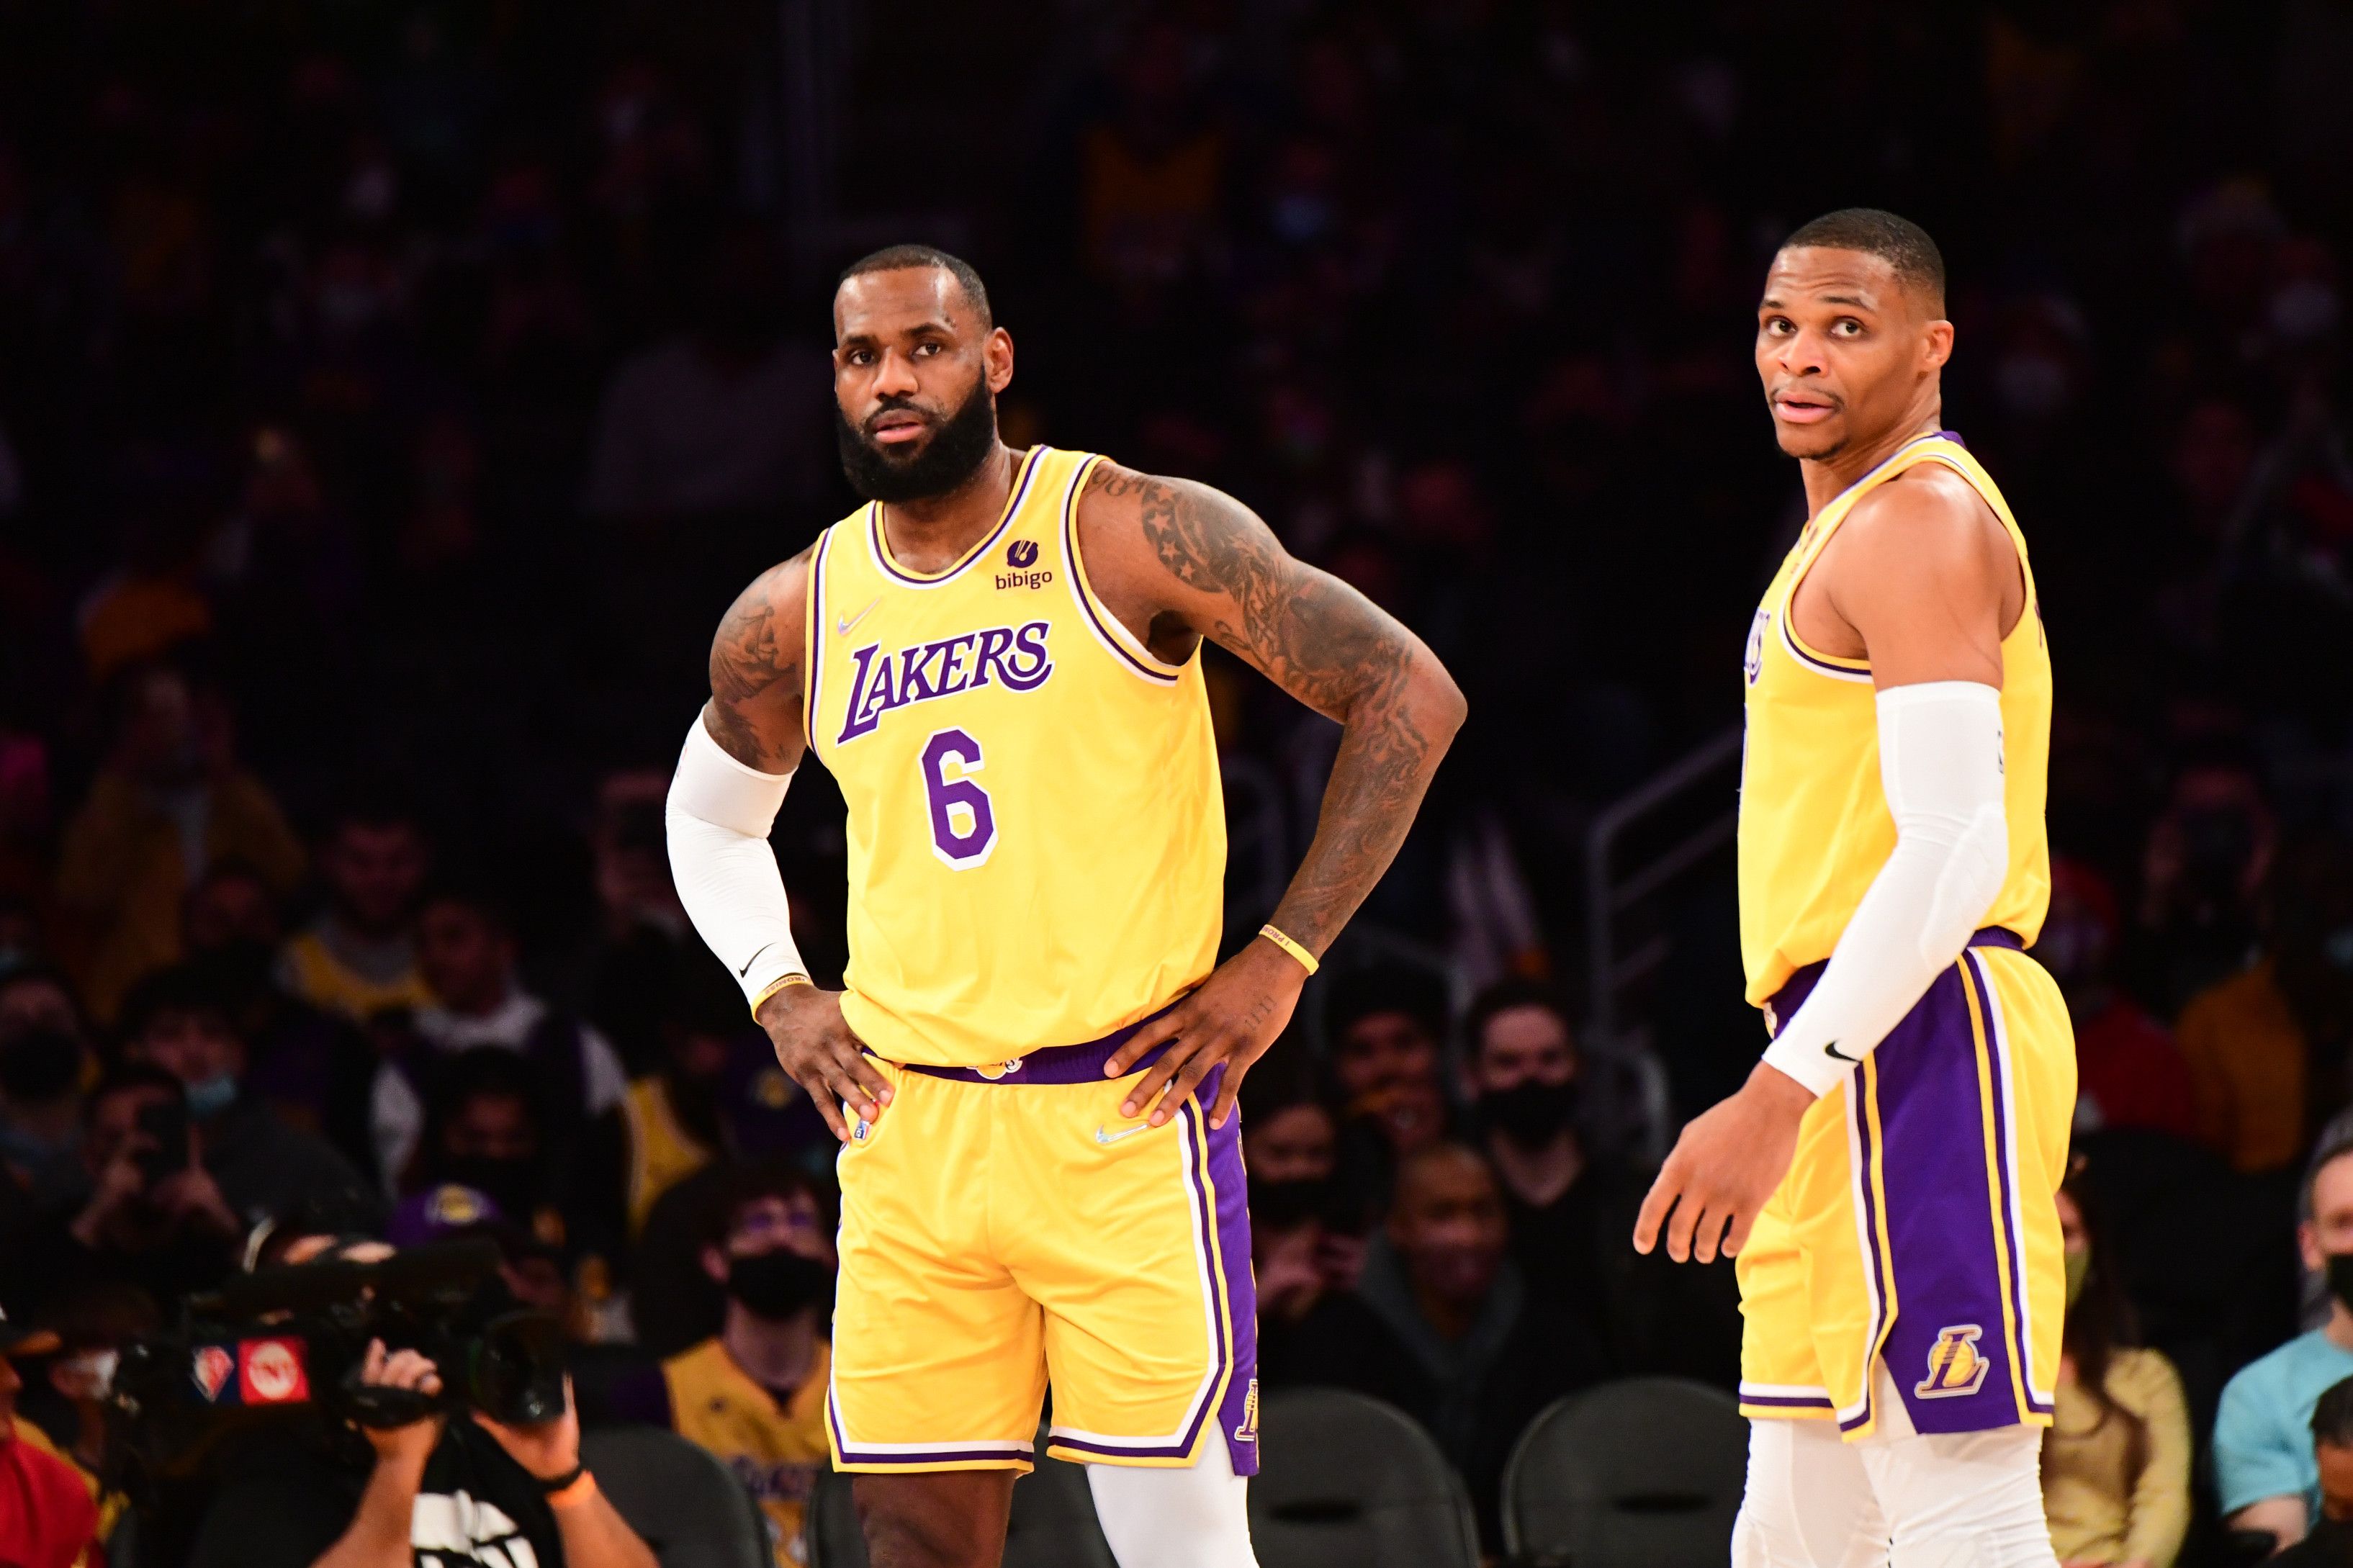 Winning Time': HBO series' Season 2 on L.A. Lakers gives 110